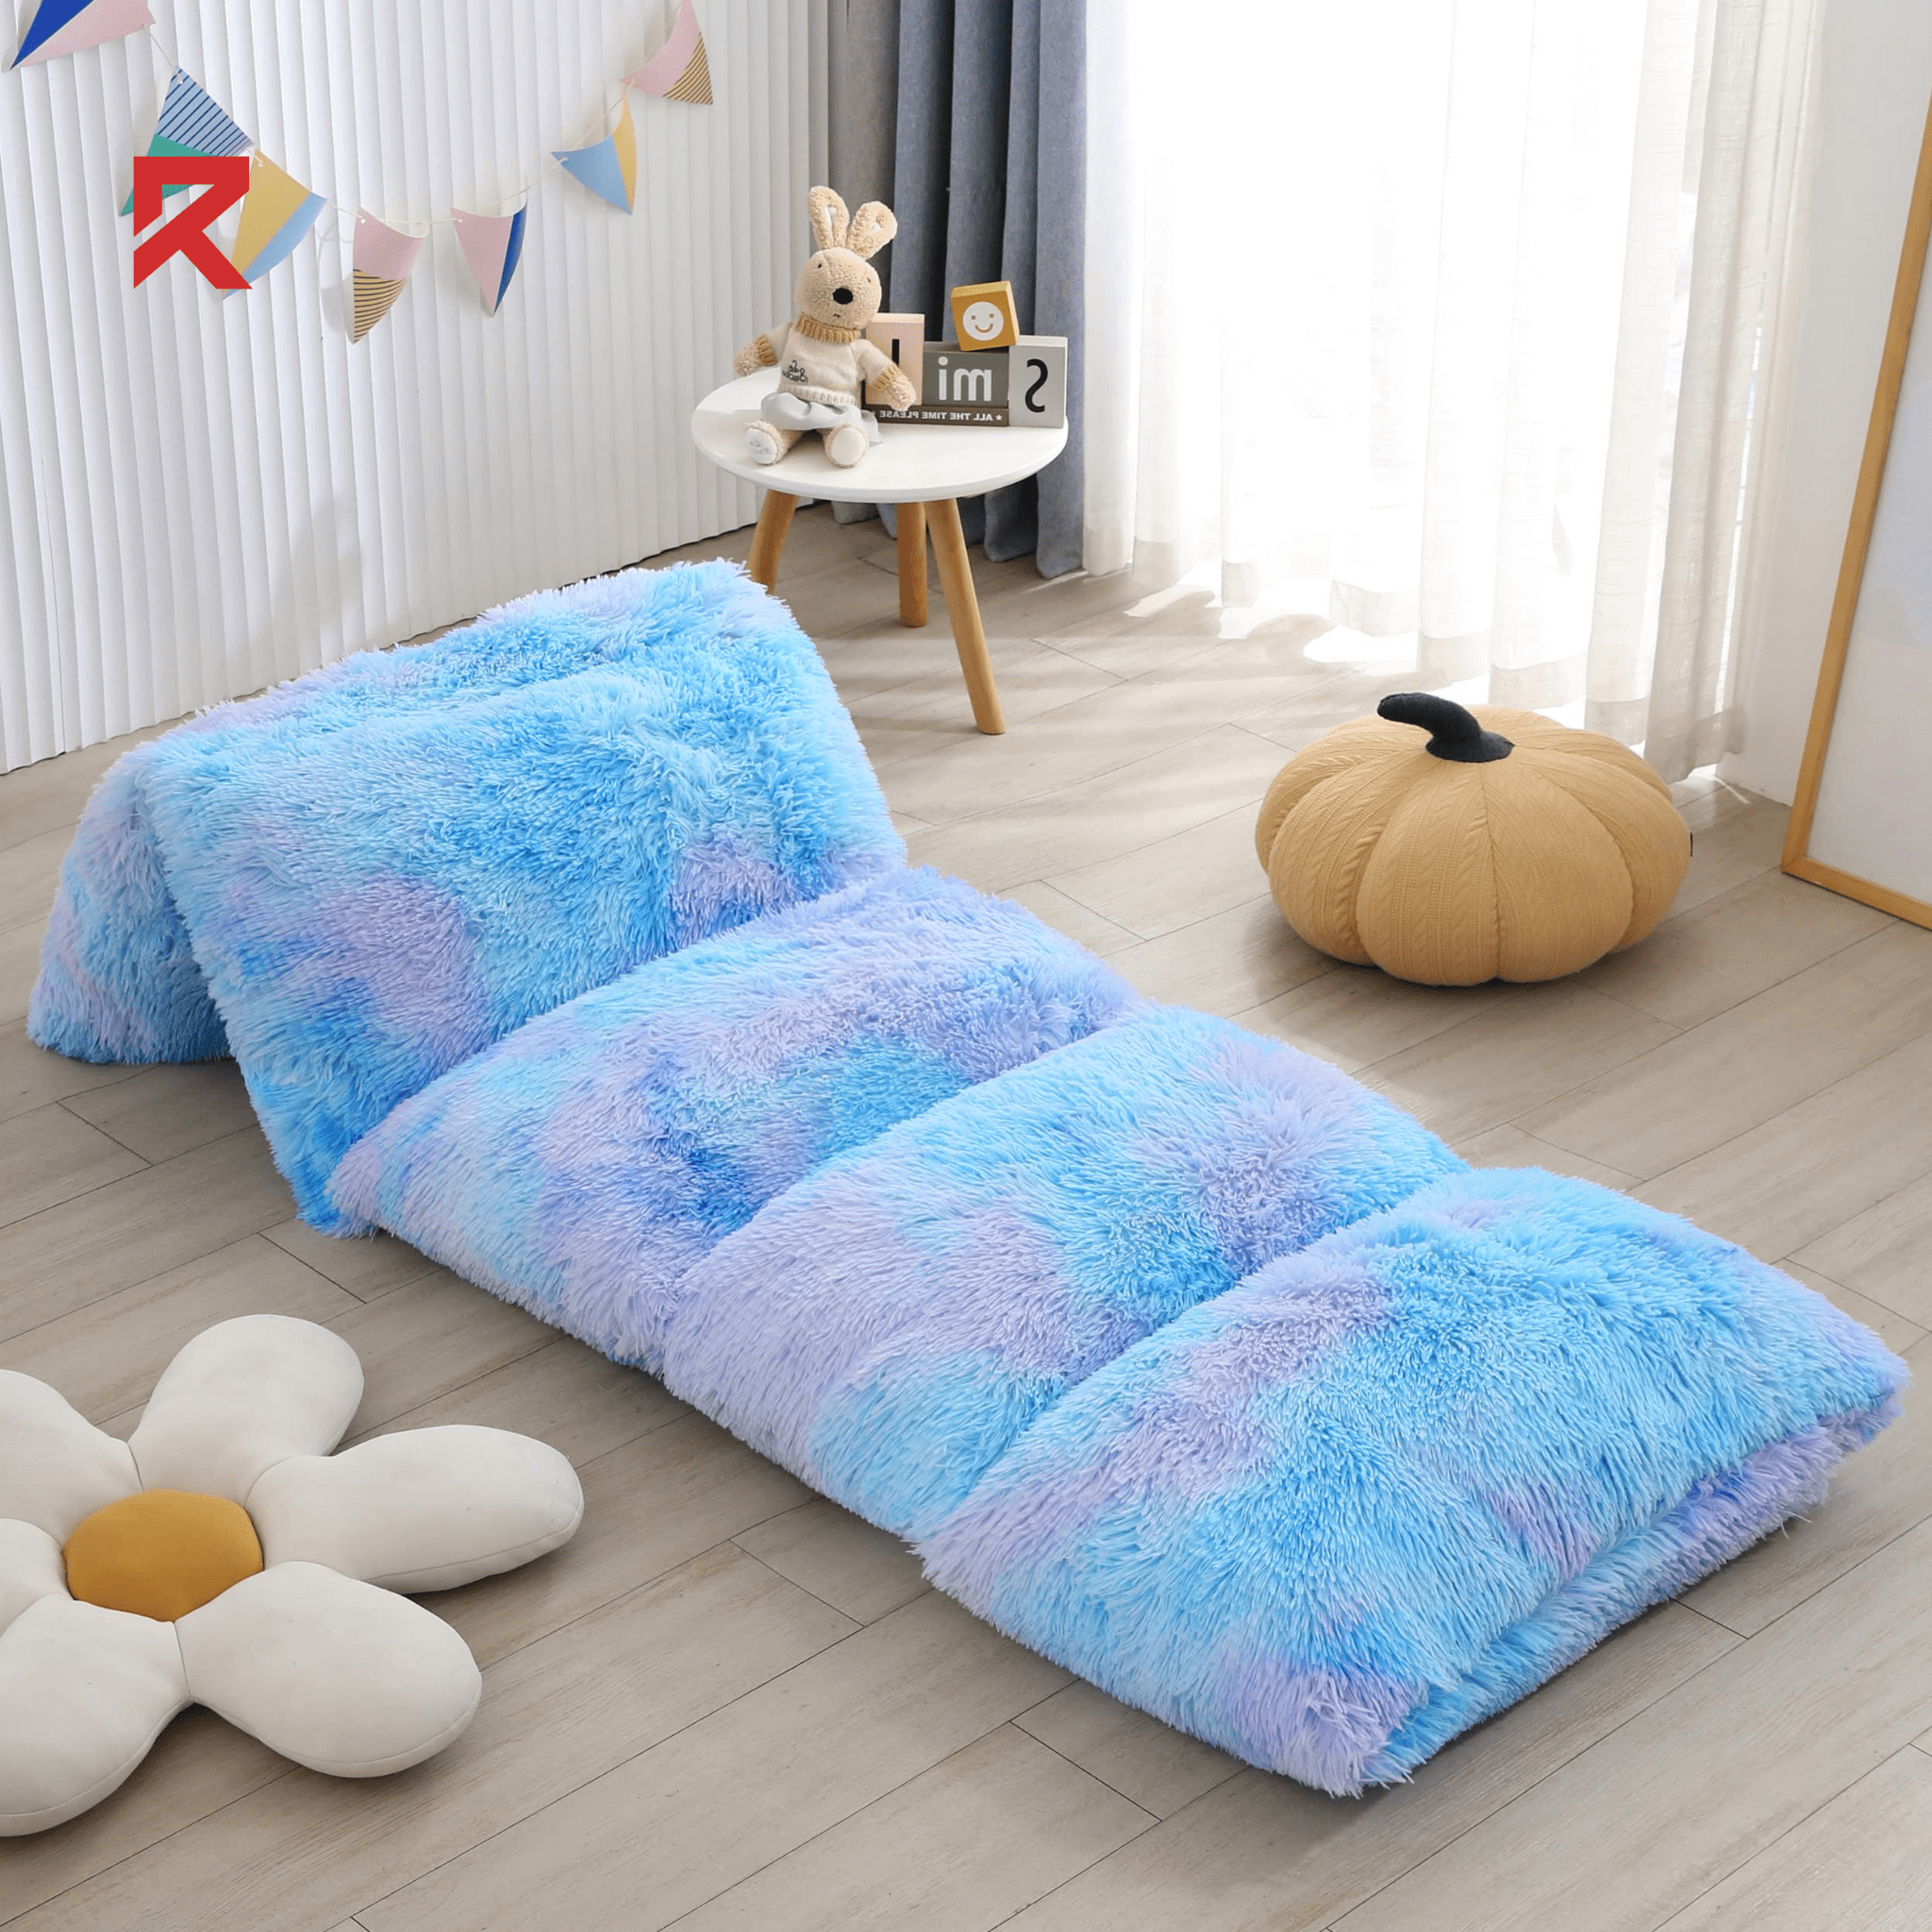 The fluffy floor pillow lounger which is one of the charismas gifts for kids